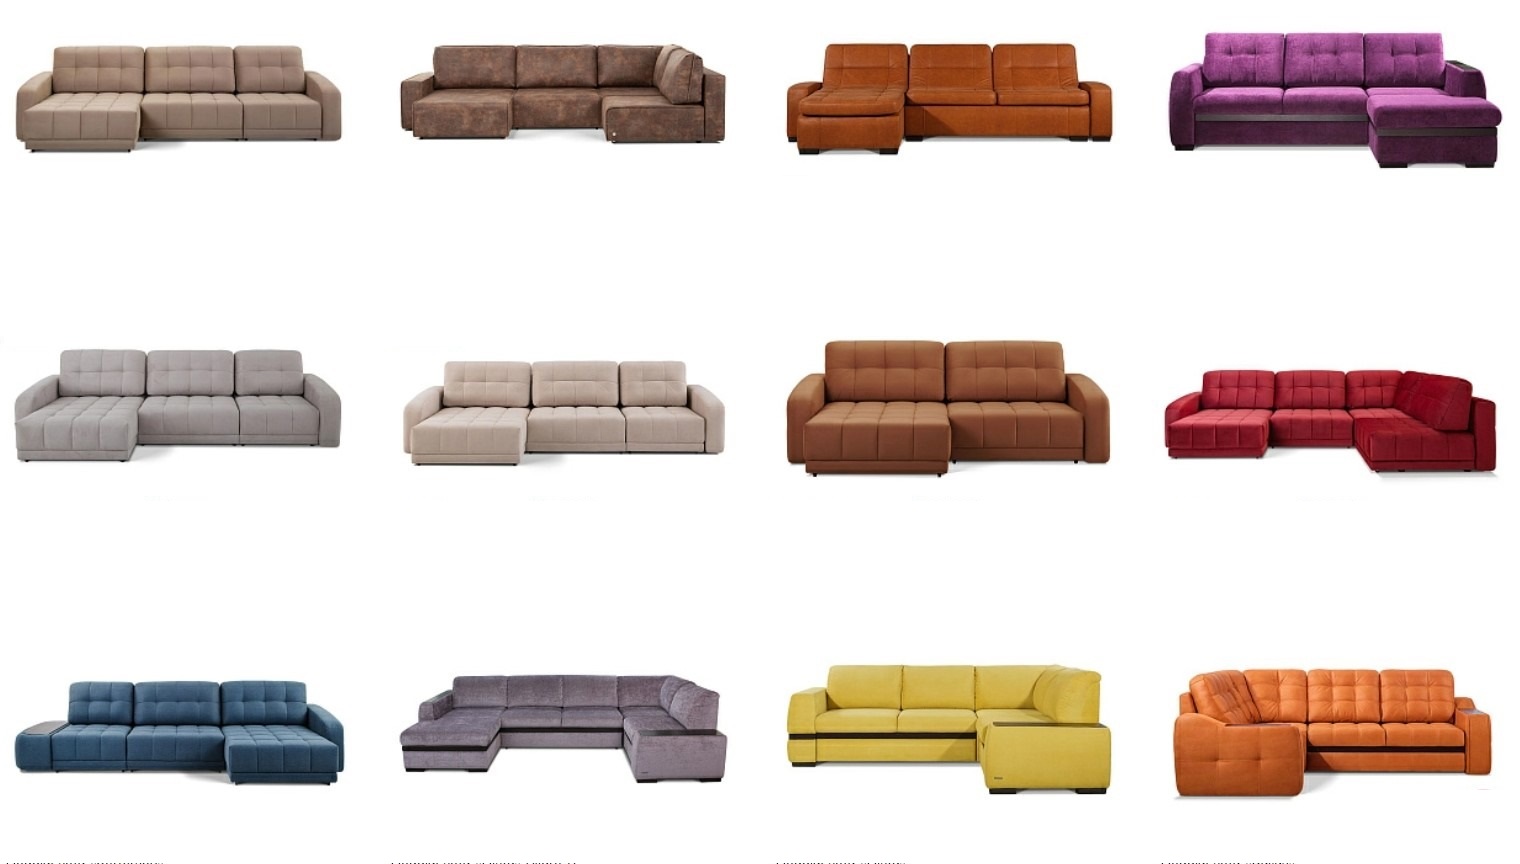 Experience Luxury and Comfort at Dubai's PUSHE Furniture Store with U-Shaped Sofas